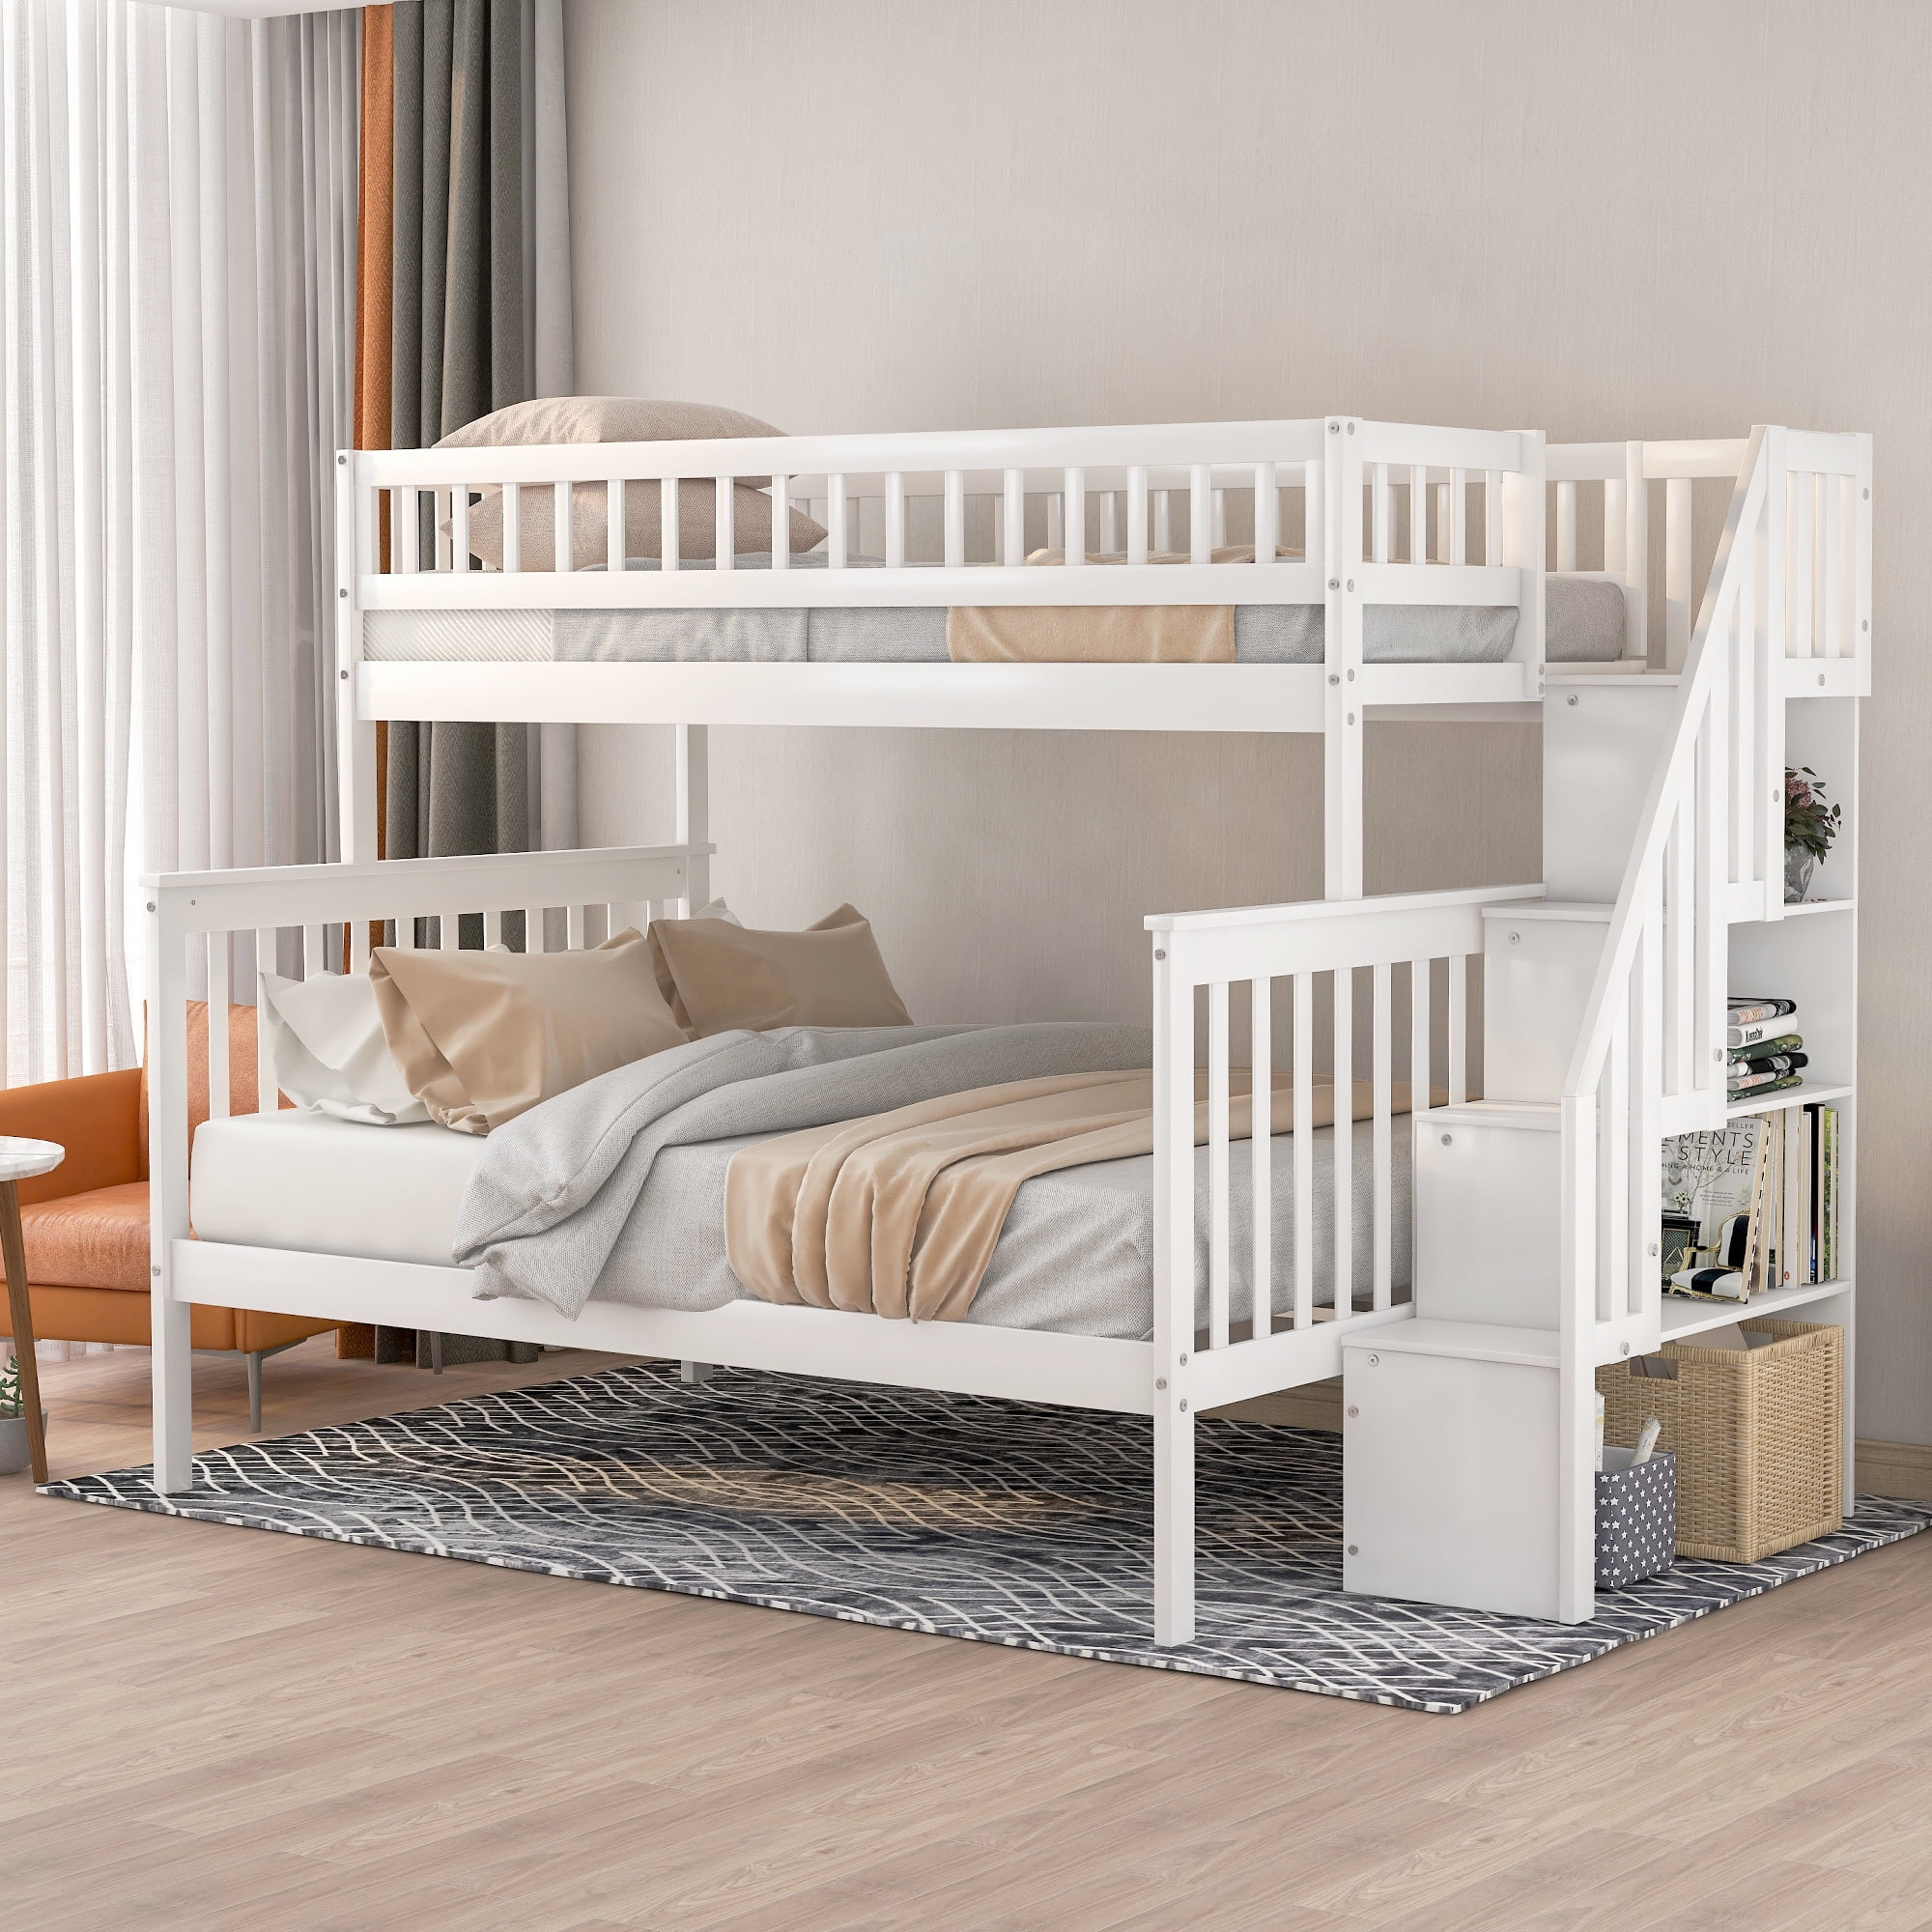 Euroco Twin Over Full Bunk Bed With, Twin Over Stairway Storage Bunk Bed With Trundle